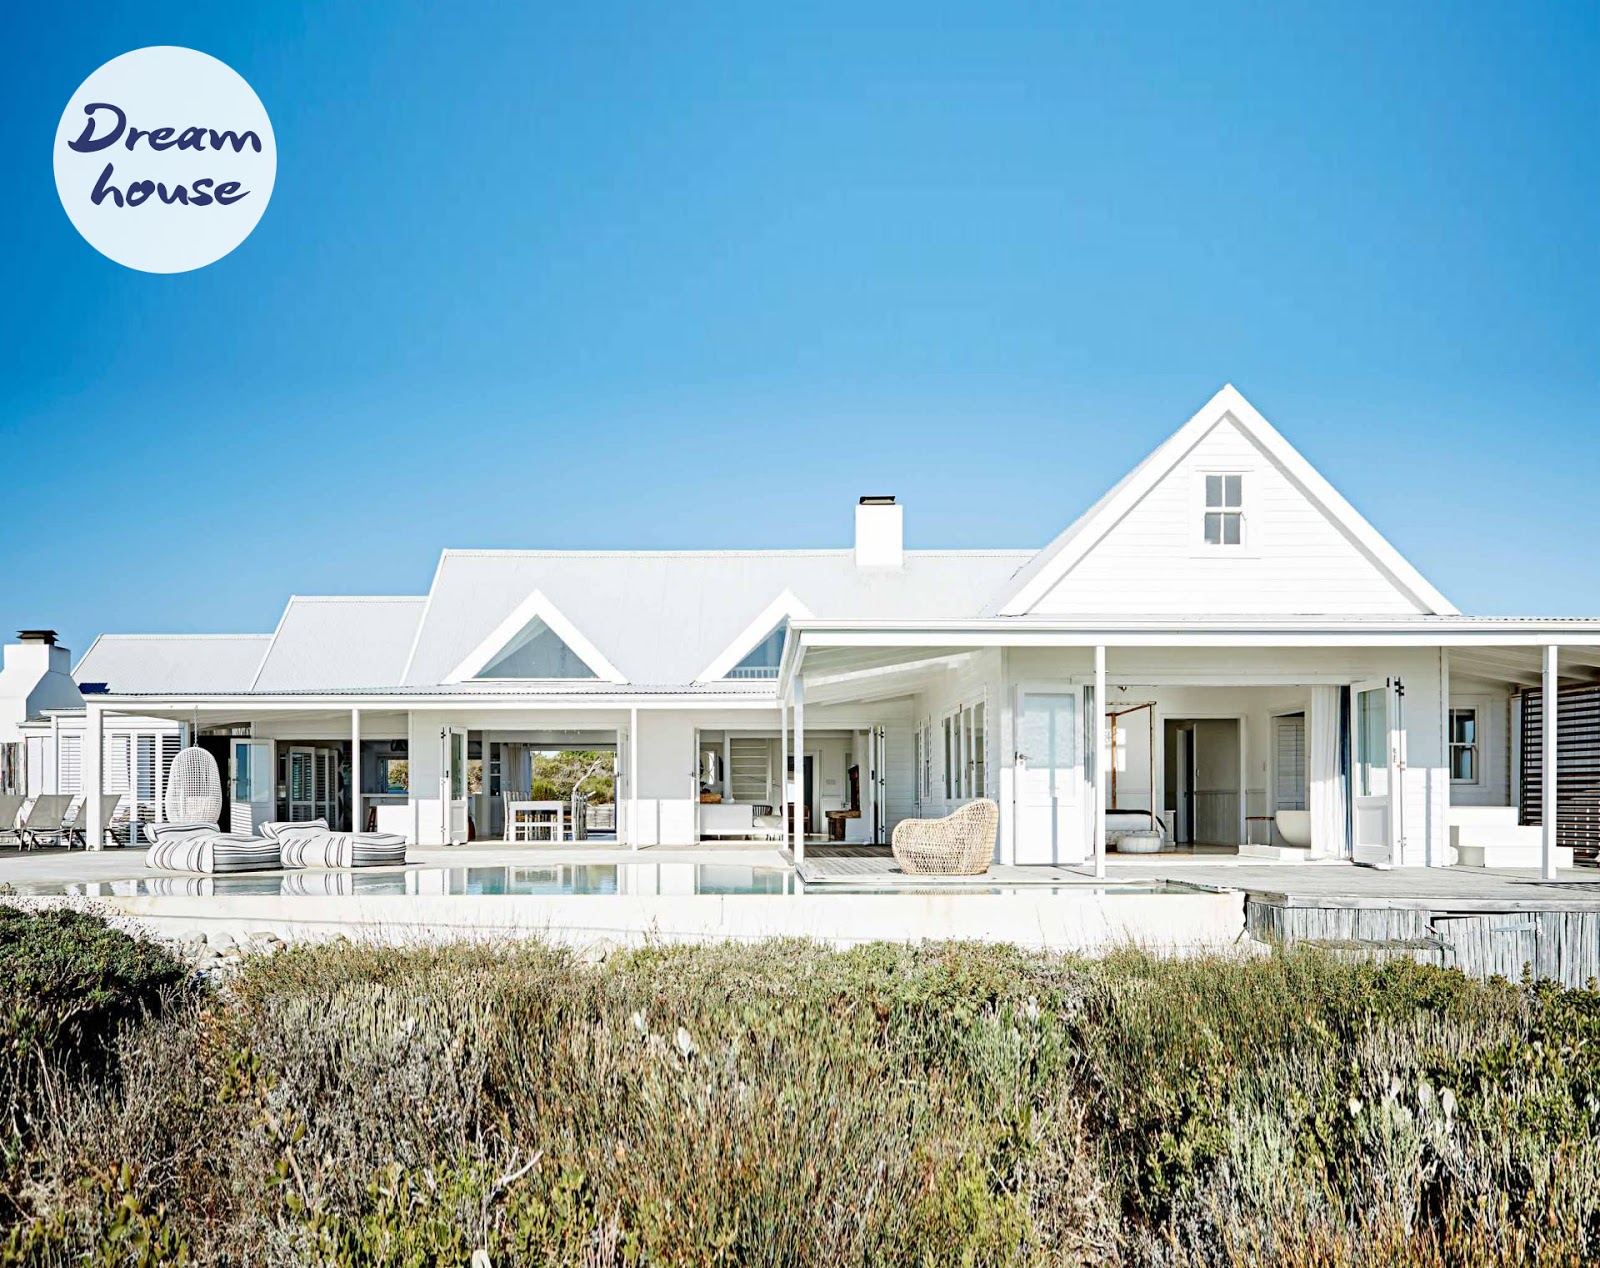 Coastal Style: South African Dream House